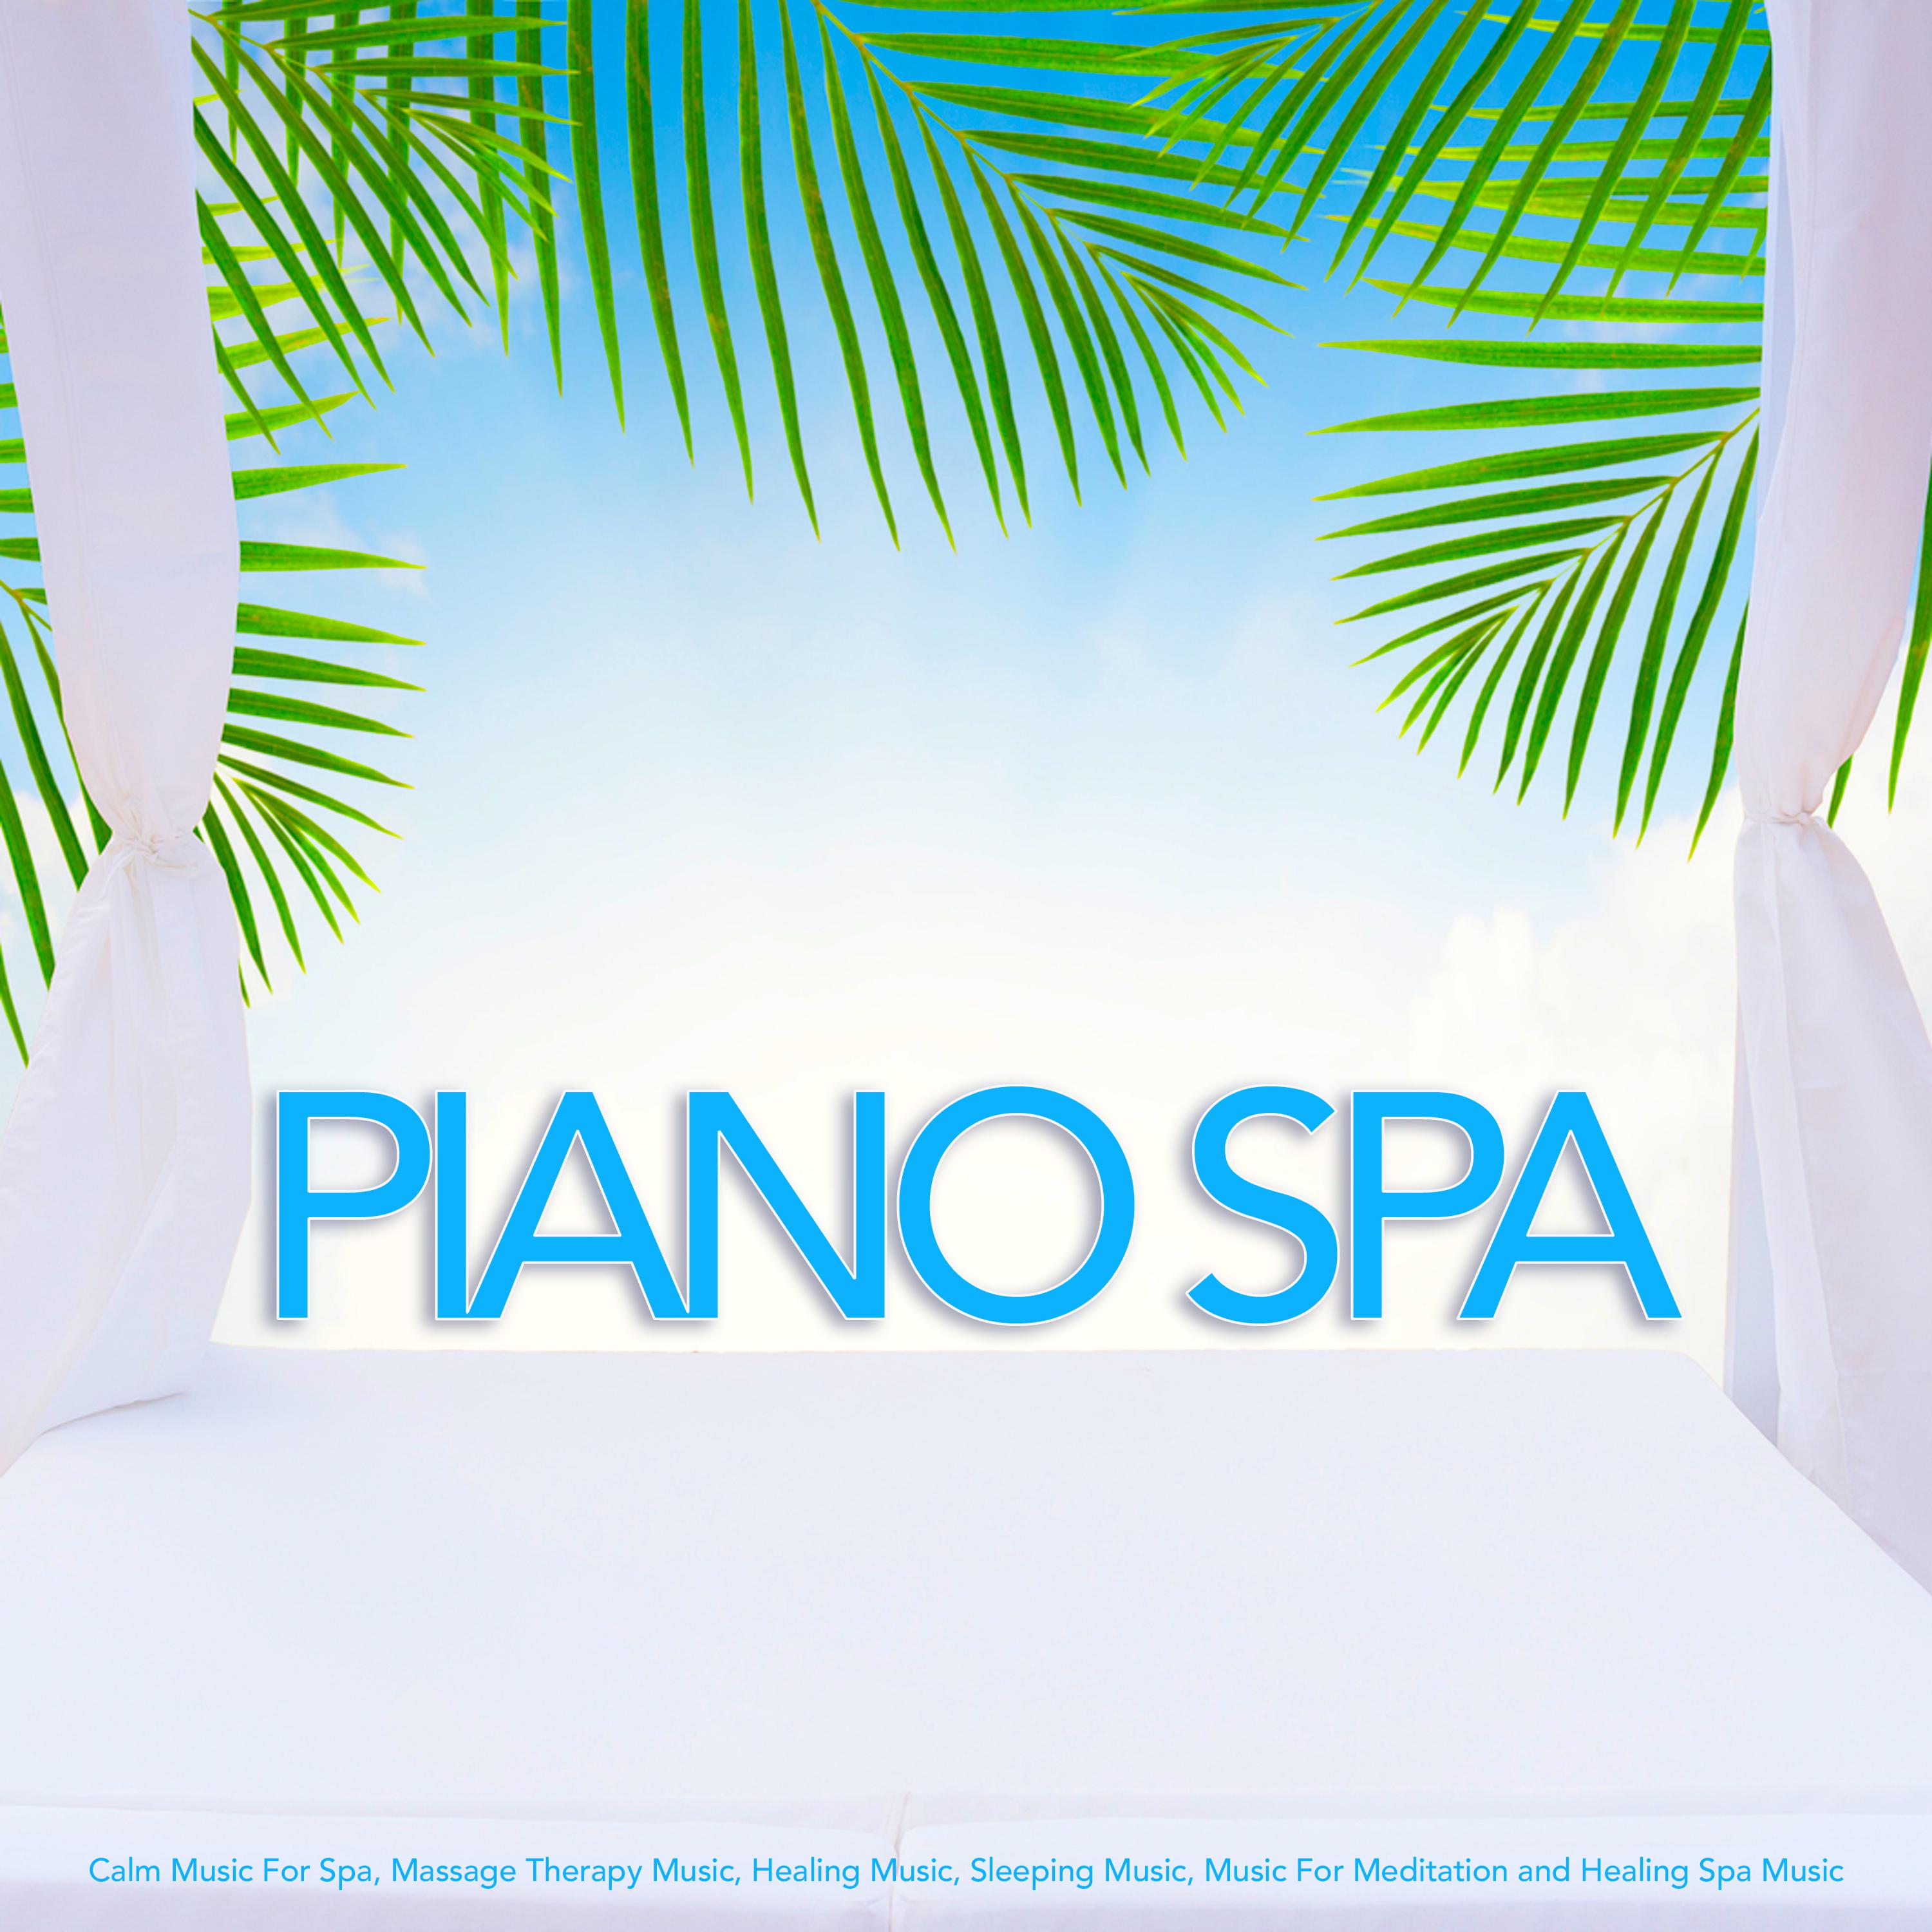 Piano Spa: Calm Music For Spa, Massage Therapy Music, Healing Music, Sleeping Music, Music For Meditation and Healing Spa Music